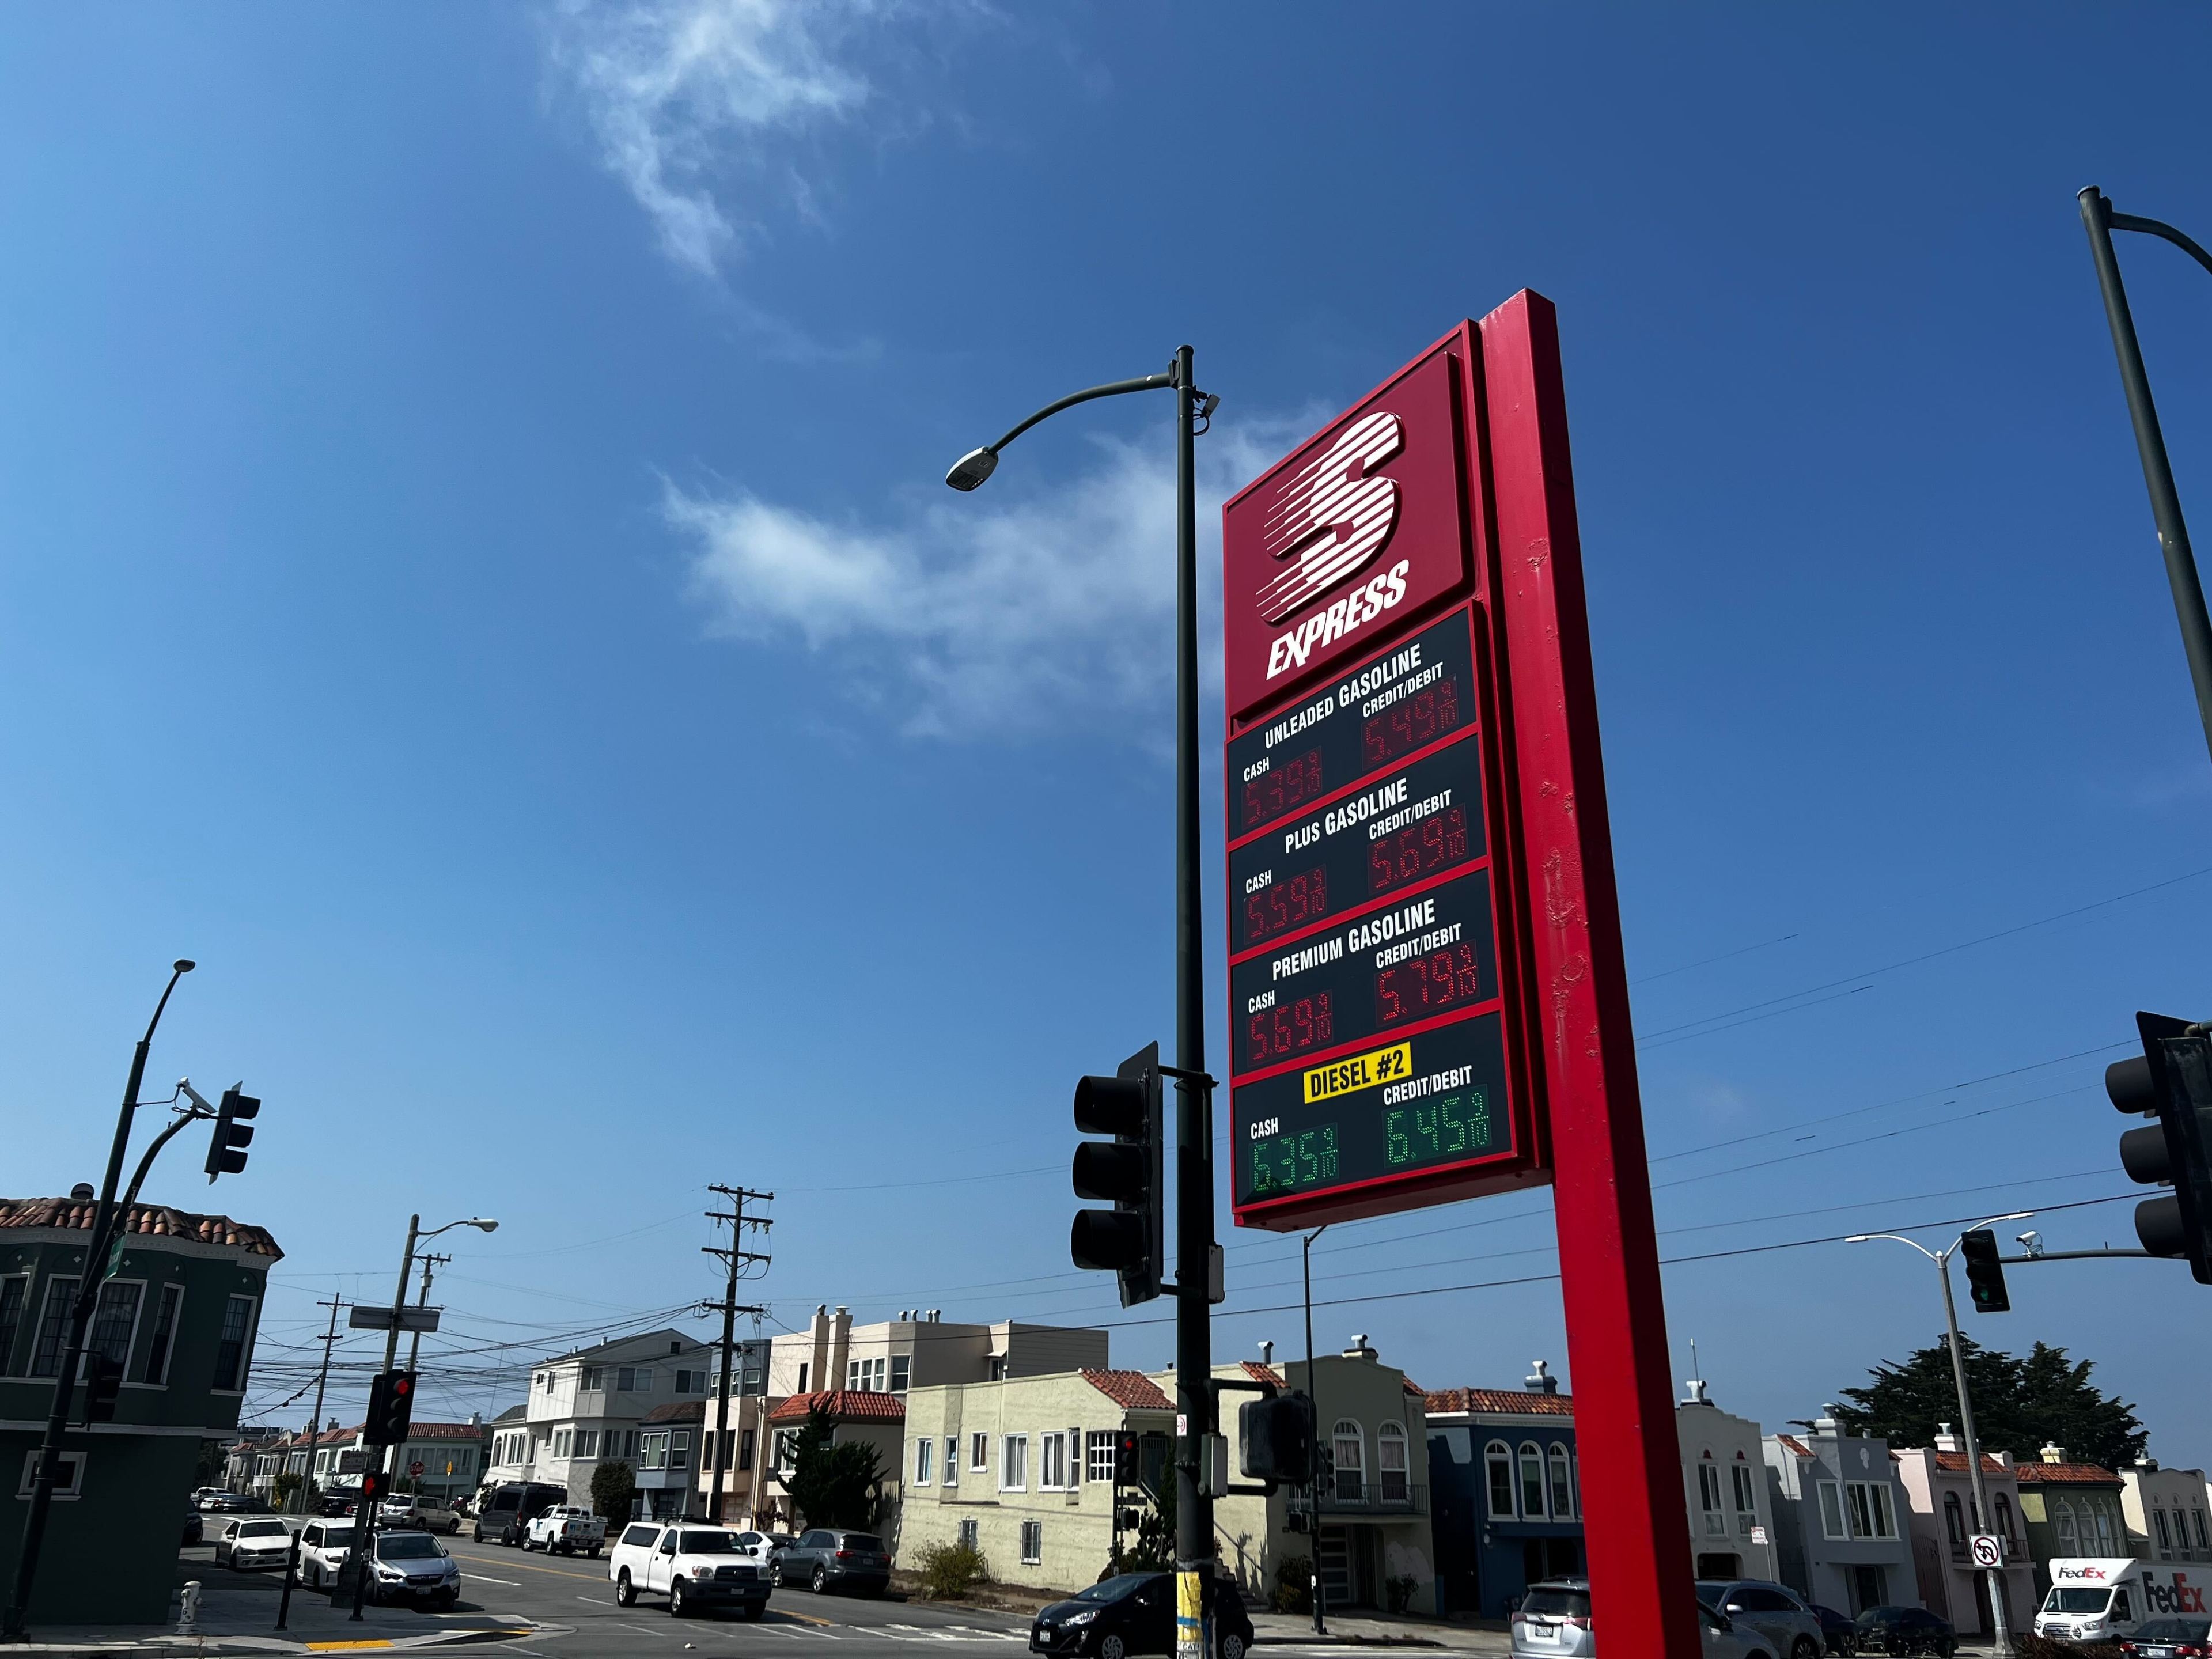 Cheap Gas Bay Area: Here’s 10 Spots With Lower Prices as Costs Creep Up